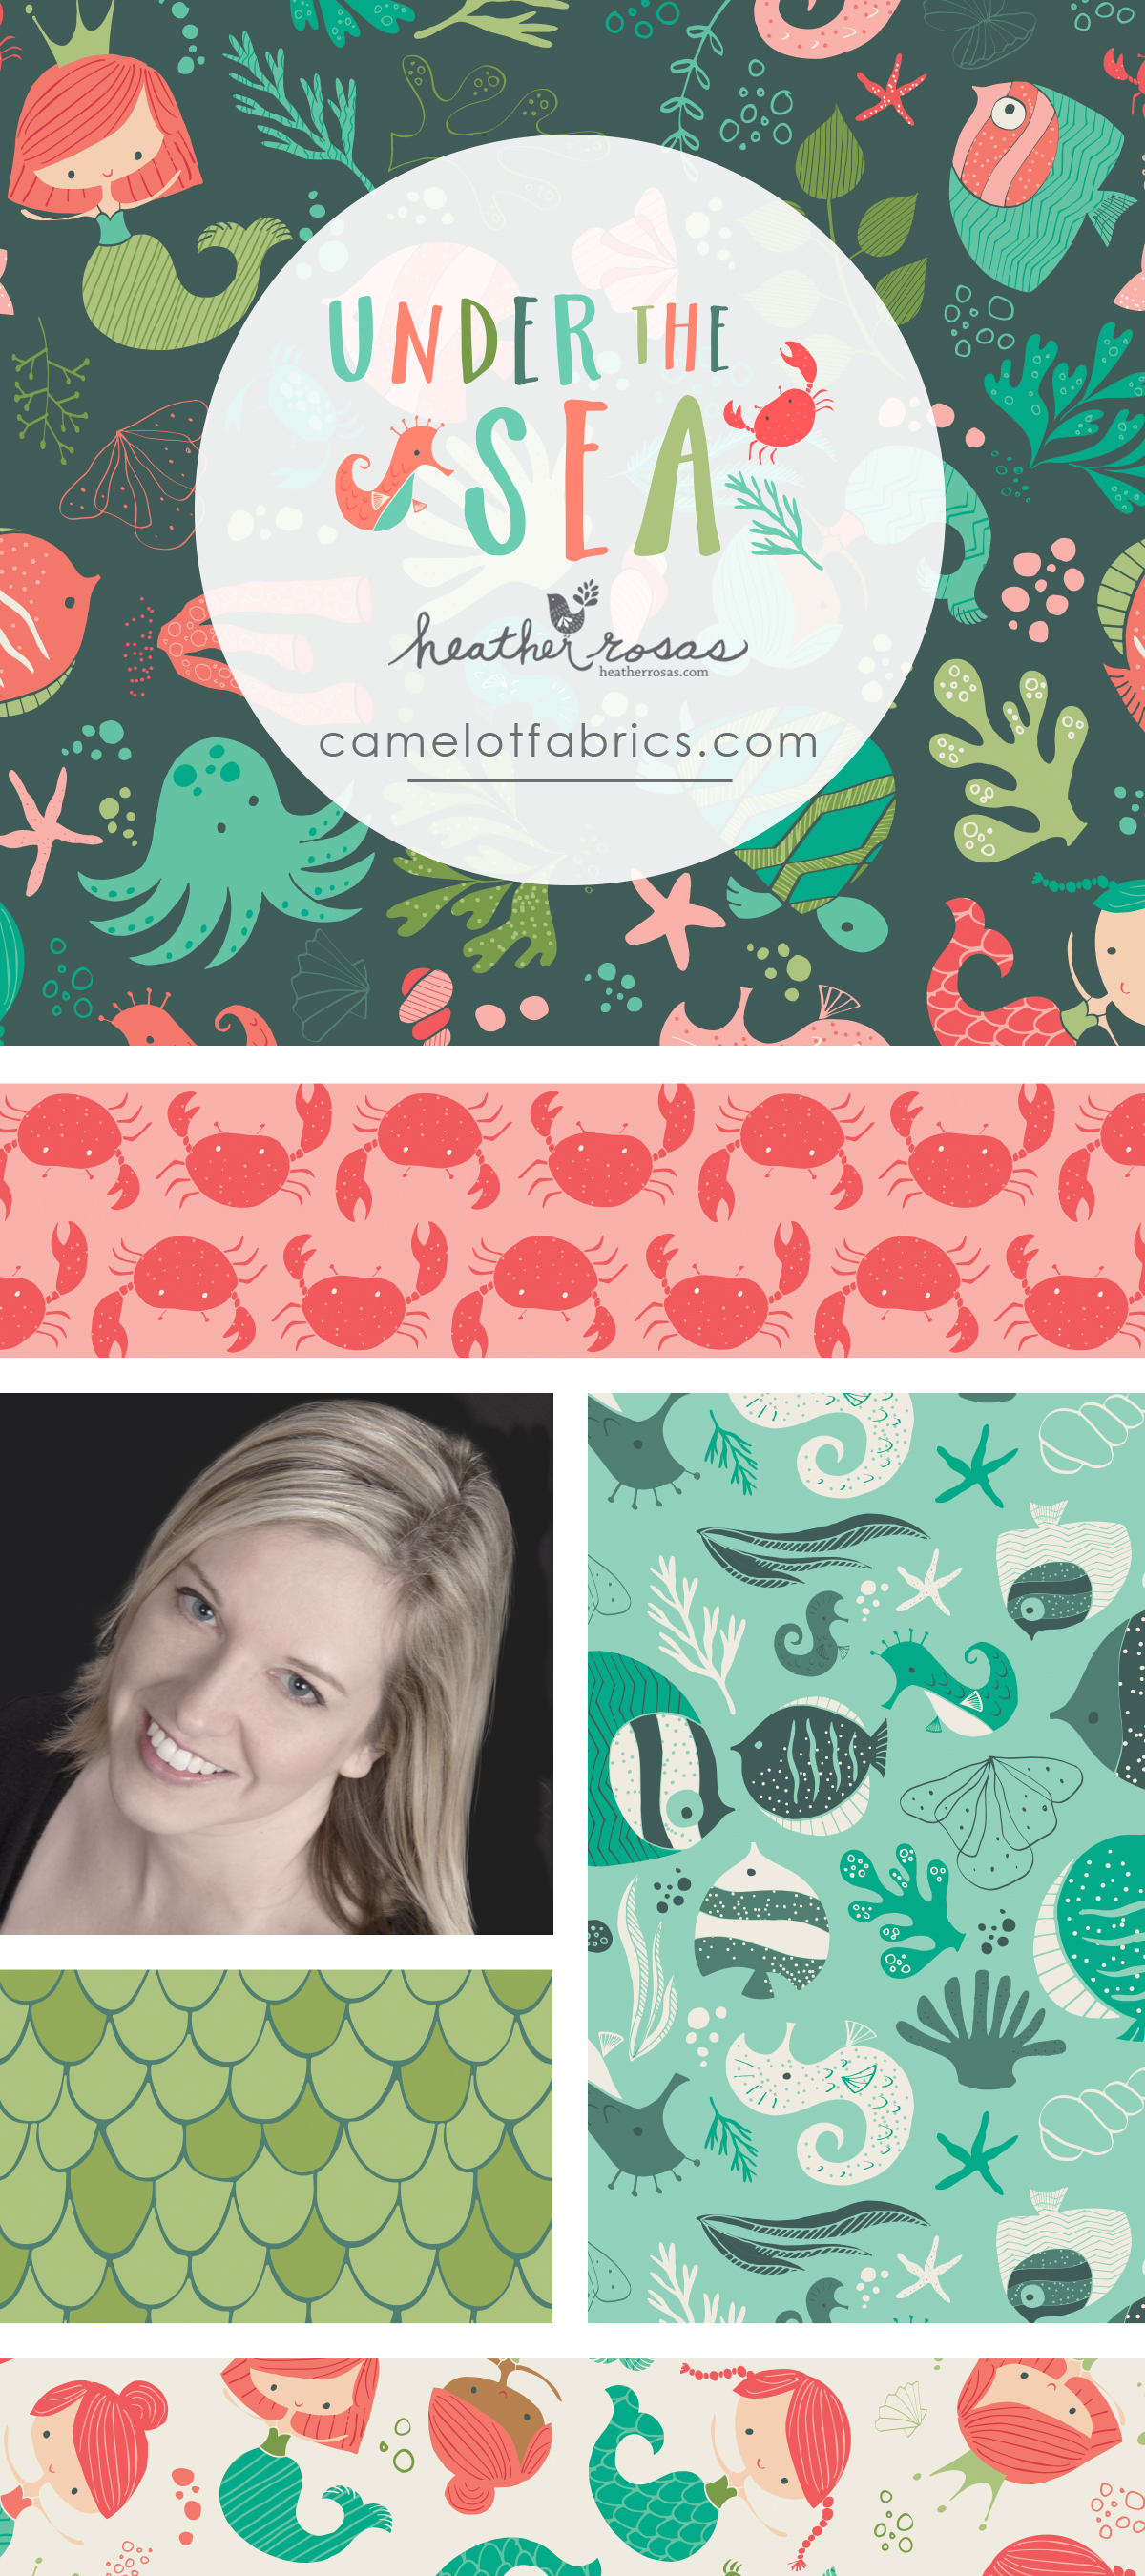 Summer 2015 | Under the Sea by Heather Rosas for Camelot Fabrics